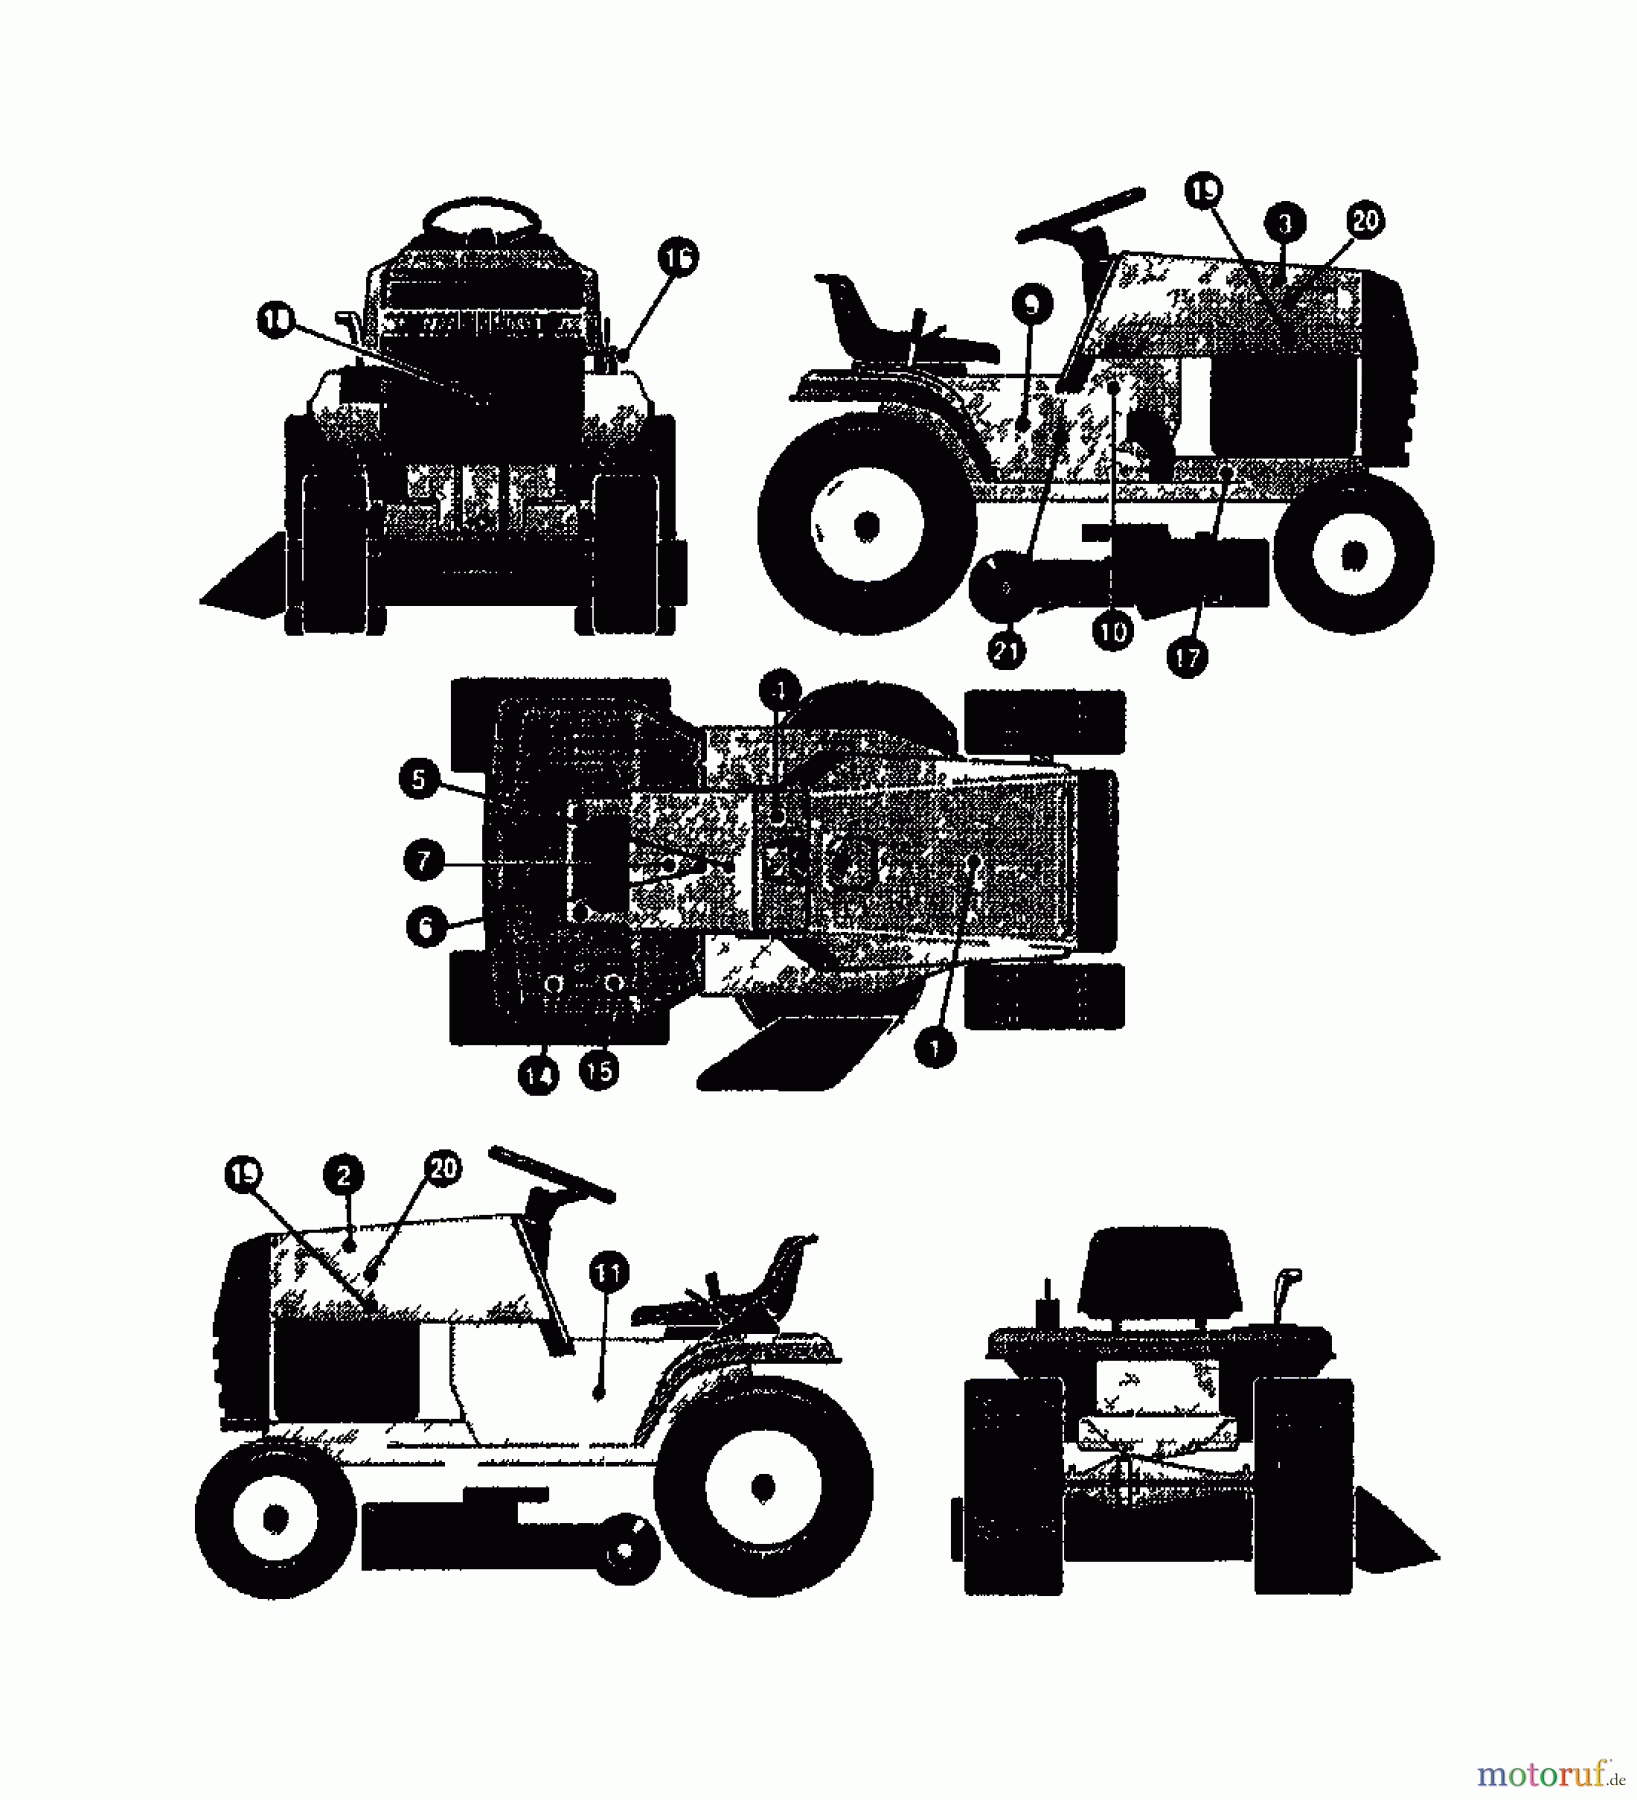  Gutbrod Lawn tractors RSB 80-12 00097.07  (1995) Decal